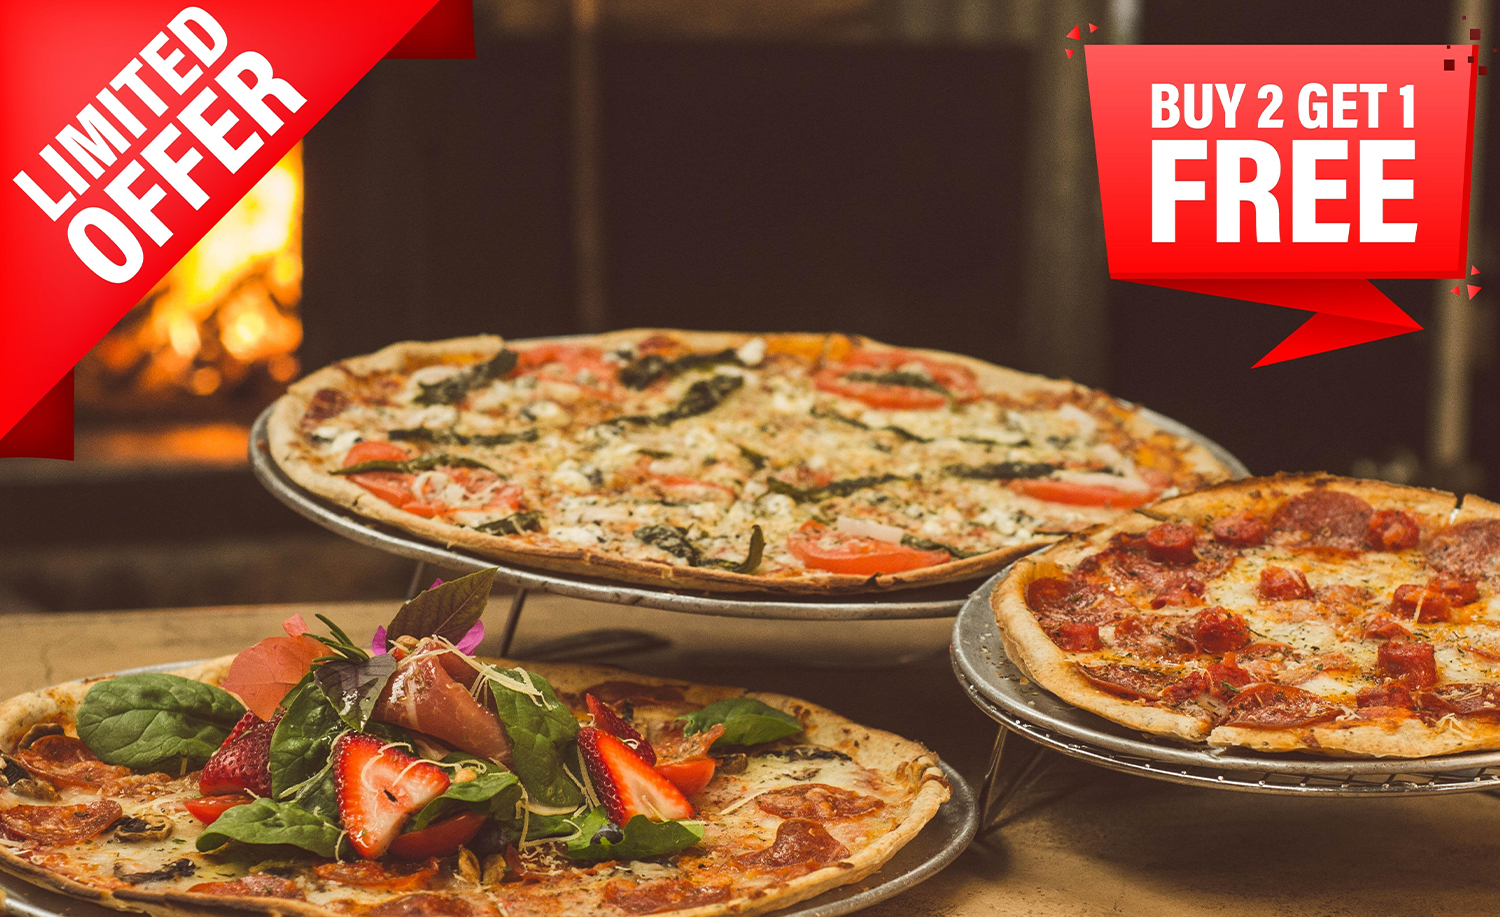 Buy 2 get 1 free pizza could end with HFSS legislation